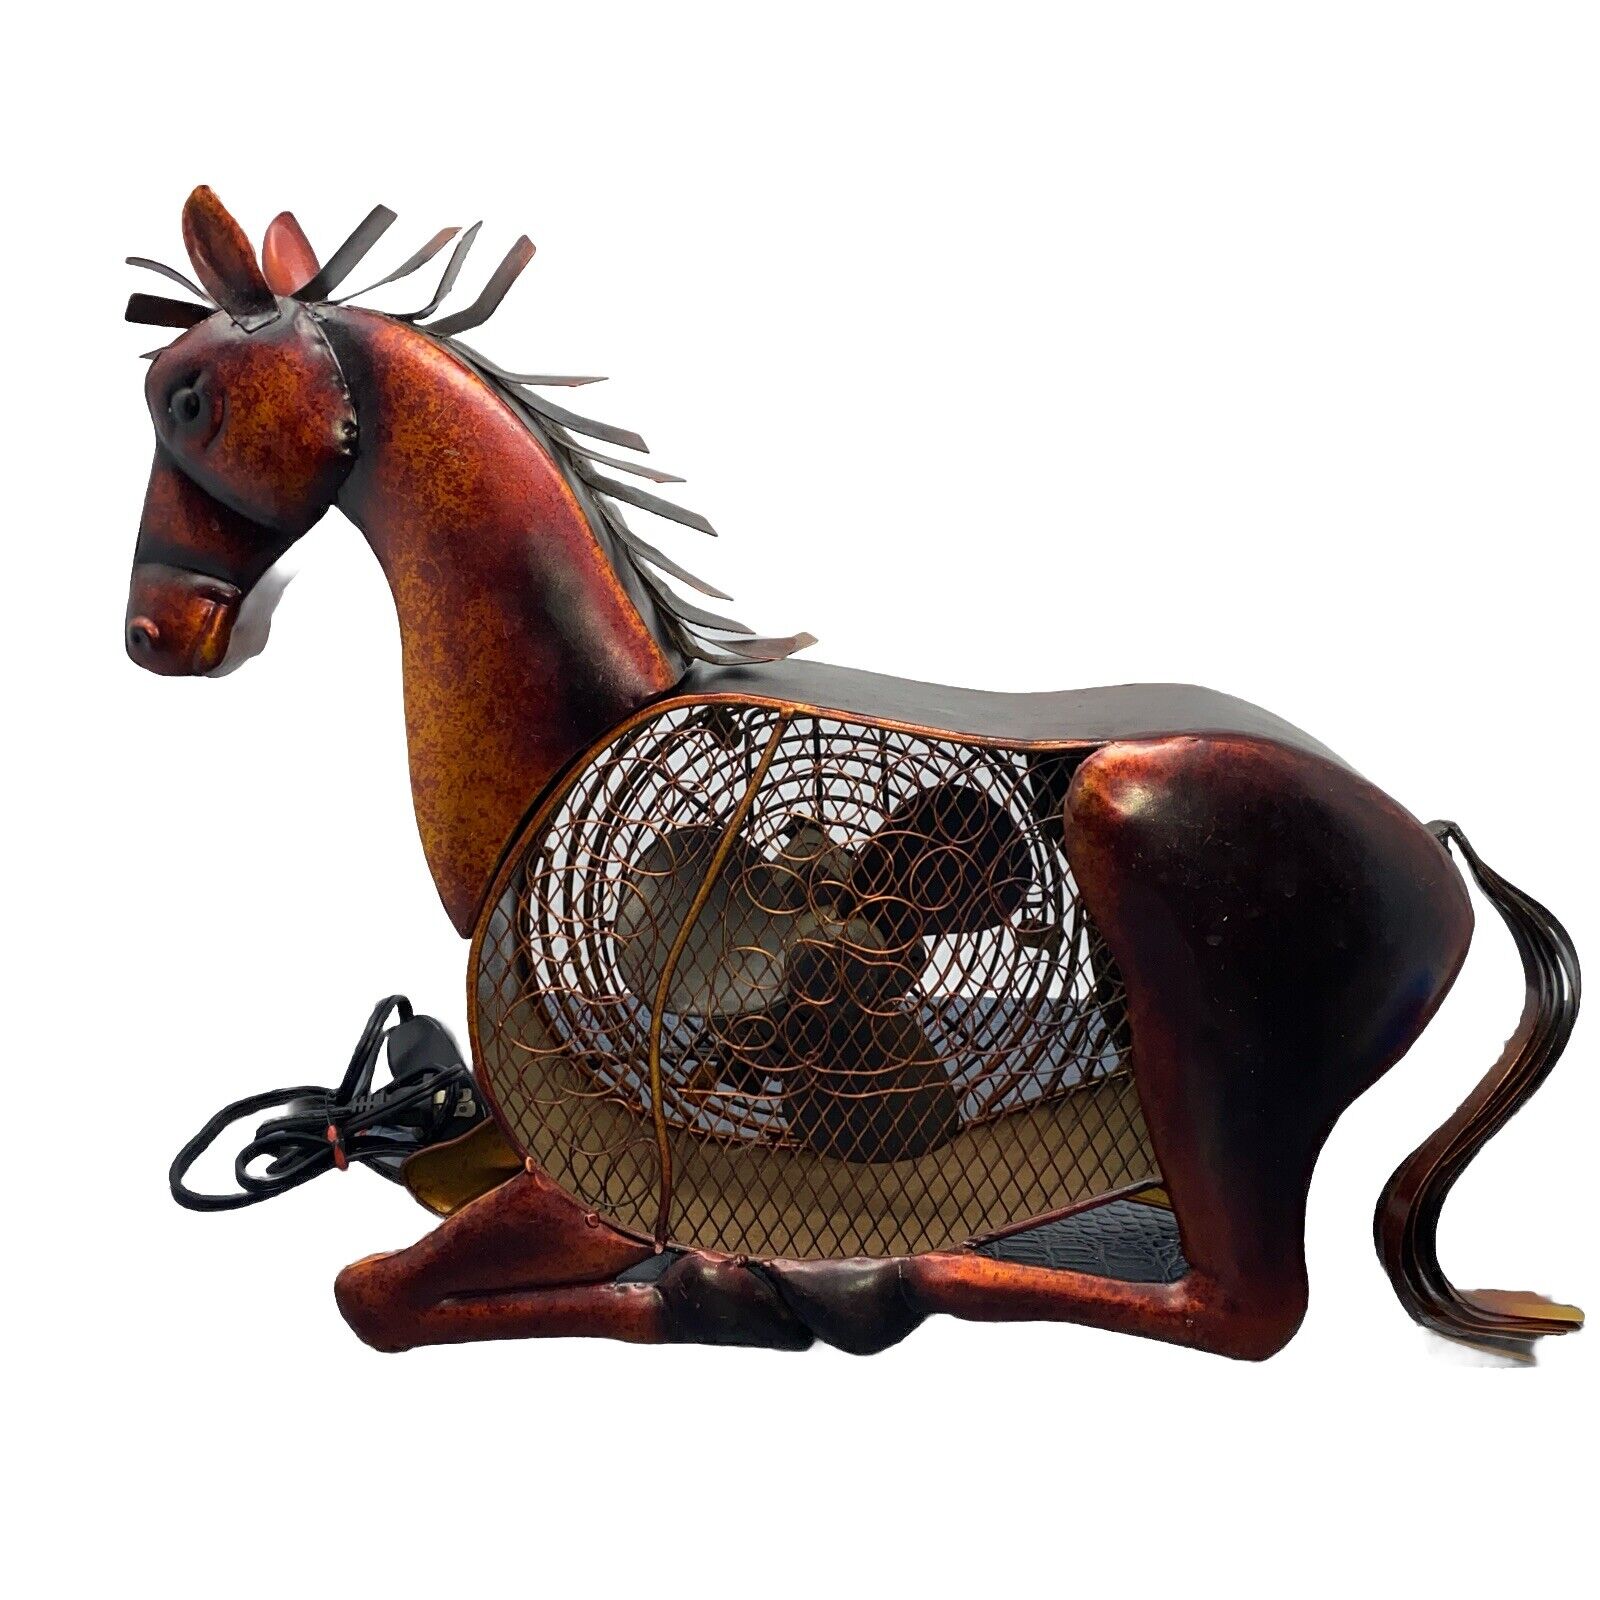 Horse Shaped Decorative Figurine Fan by Deco Breeze Tested And Works